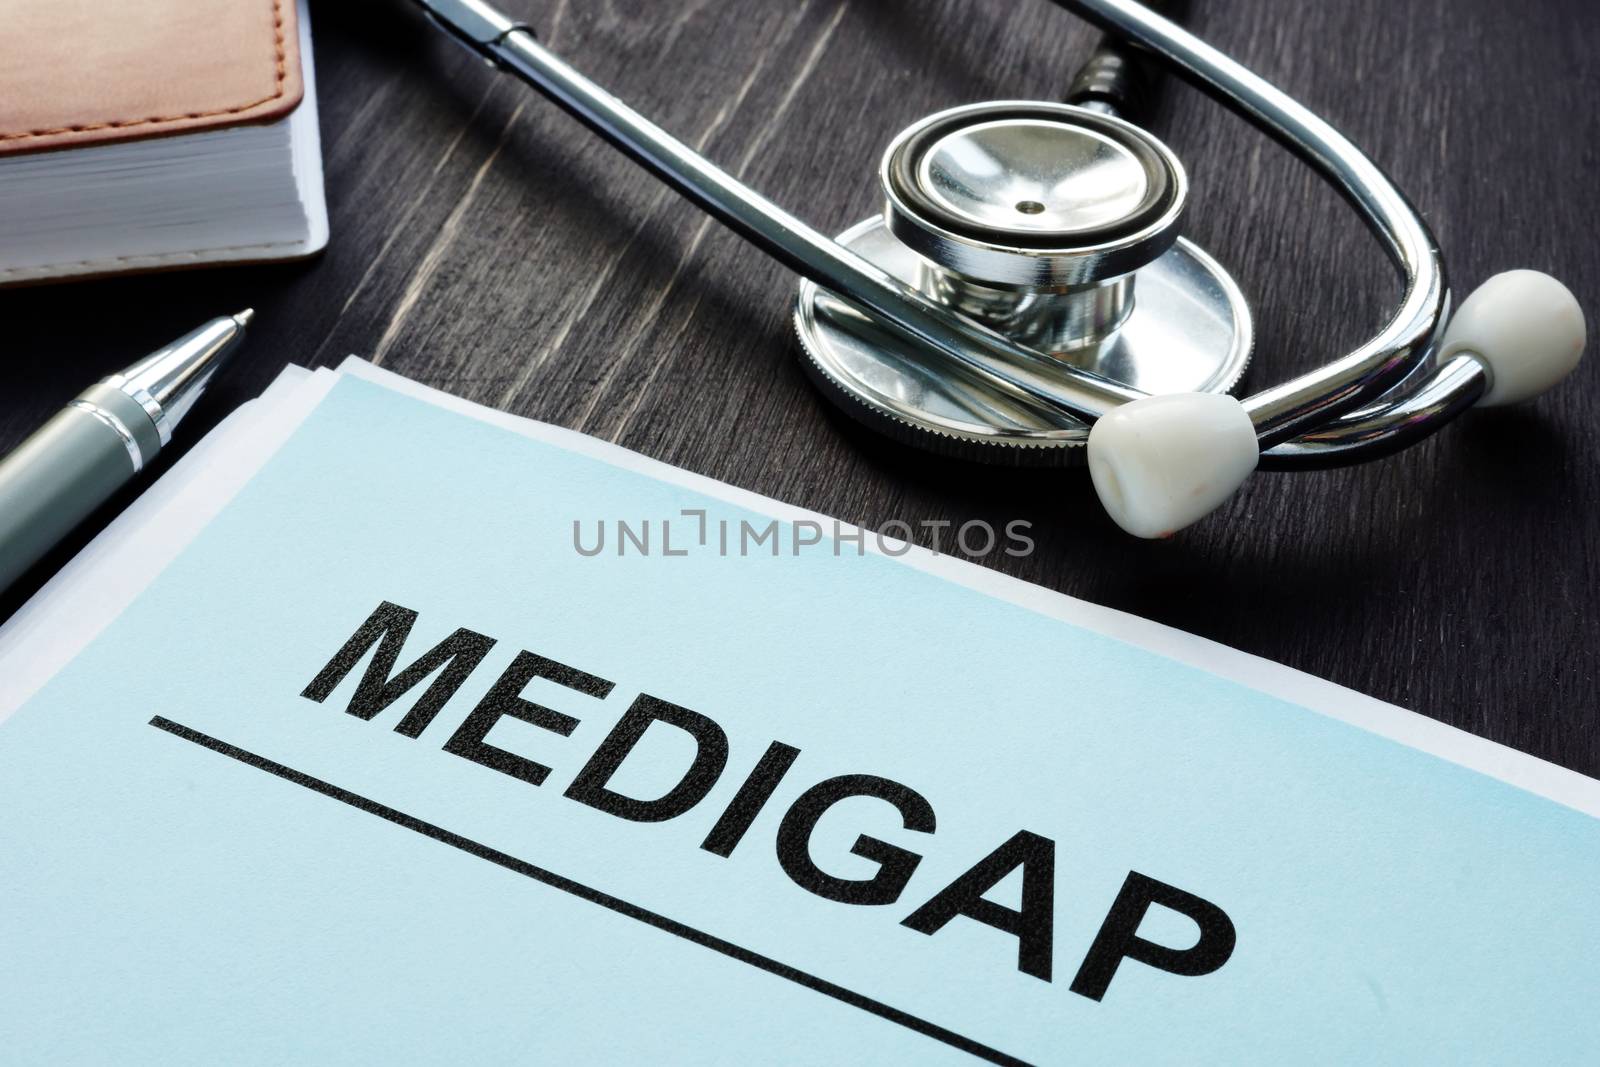 Medigap Medicare Supplement Health Insurance papers and stethoscope.